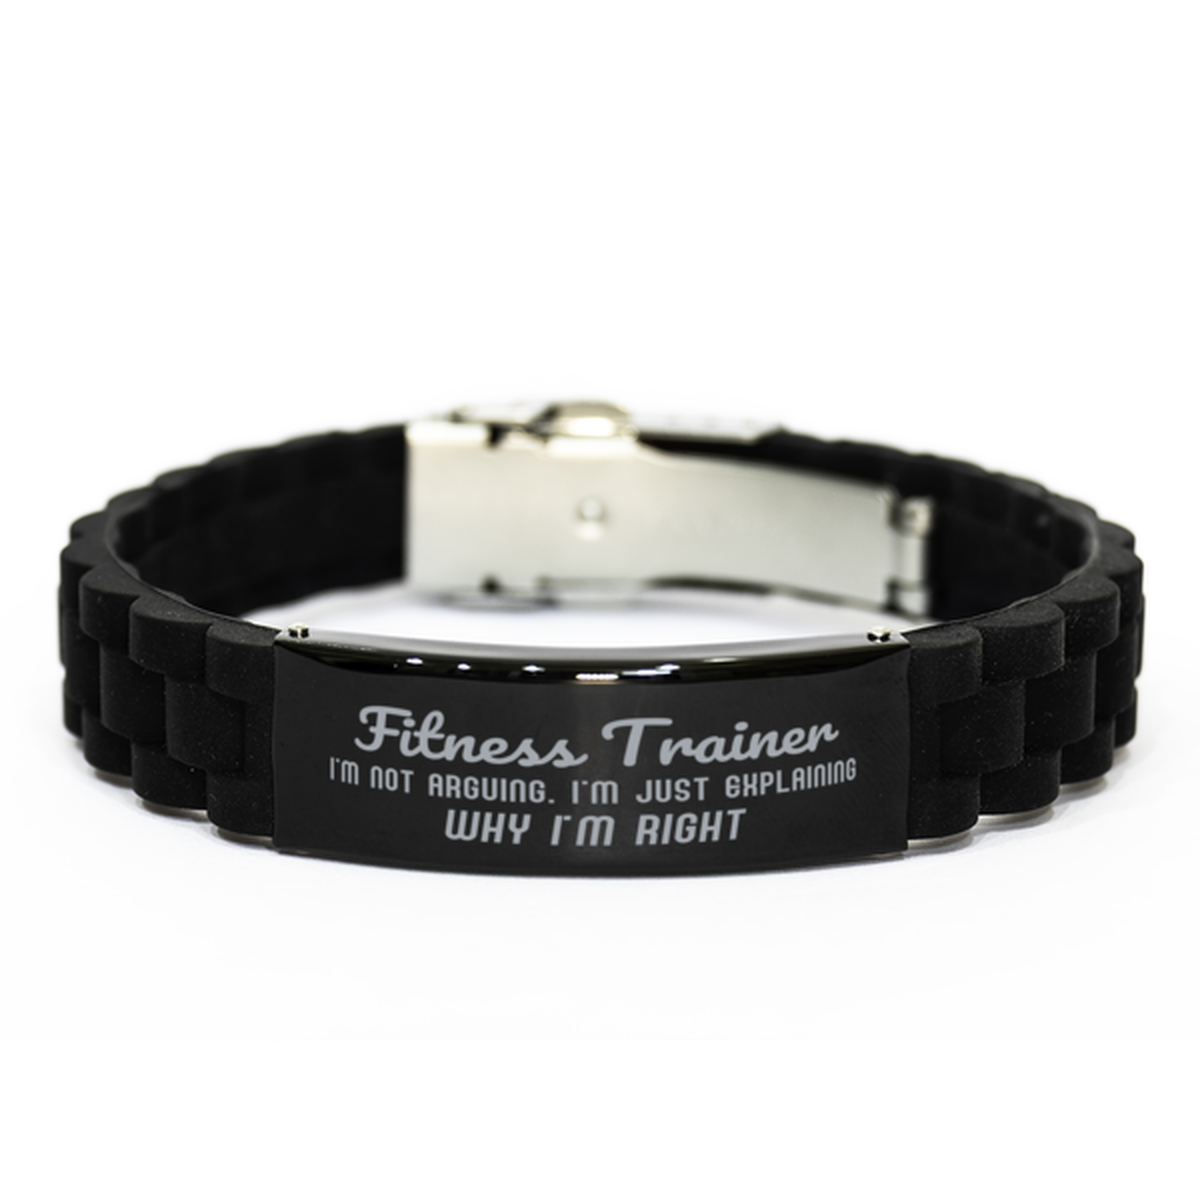 Fitness Trainer I'm not Arguing. I'm Just Explaining Why I'm RIGHT Black Glidelock Clasp Bracelet, Funny Saying Quote Fitness Trainer Gifts For Fitness Trainer Graduation Birthday Christmas Gifts for Men Women Coworker